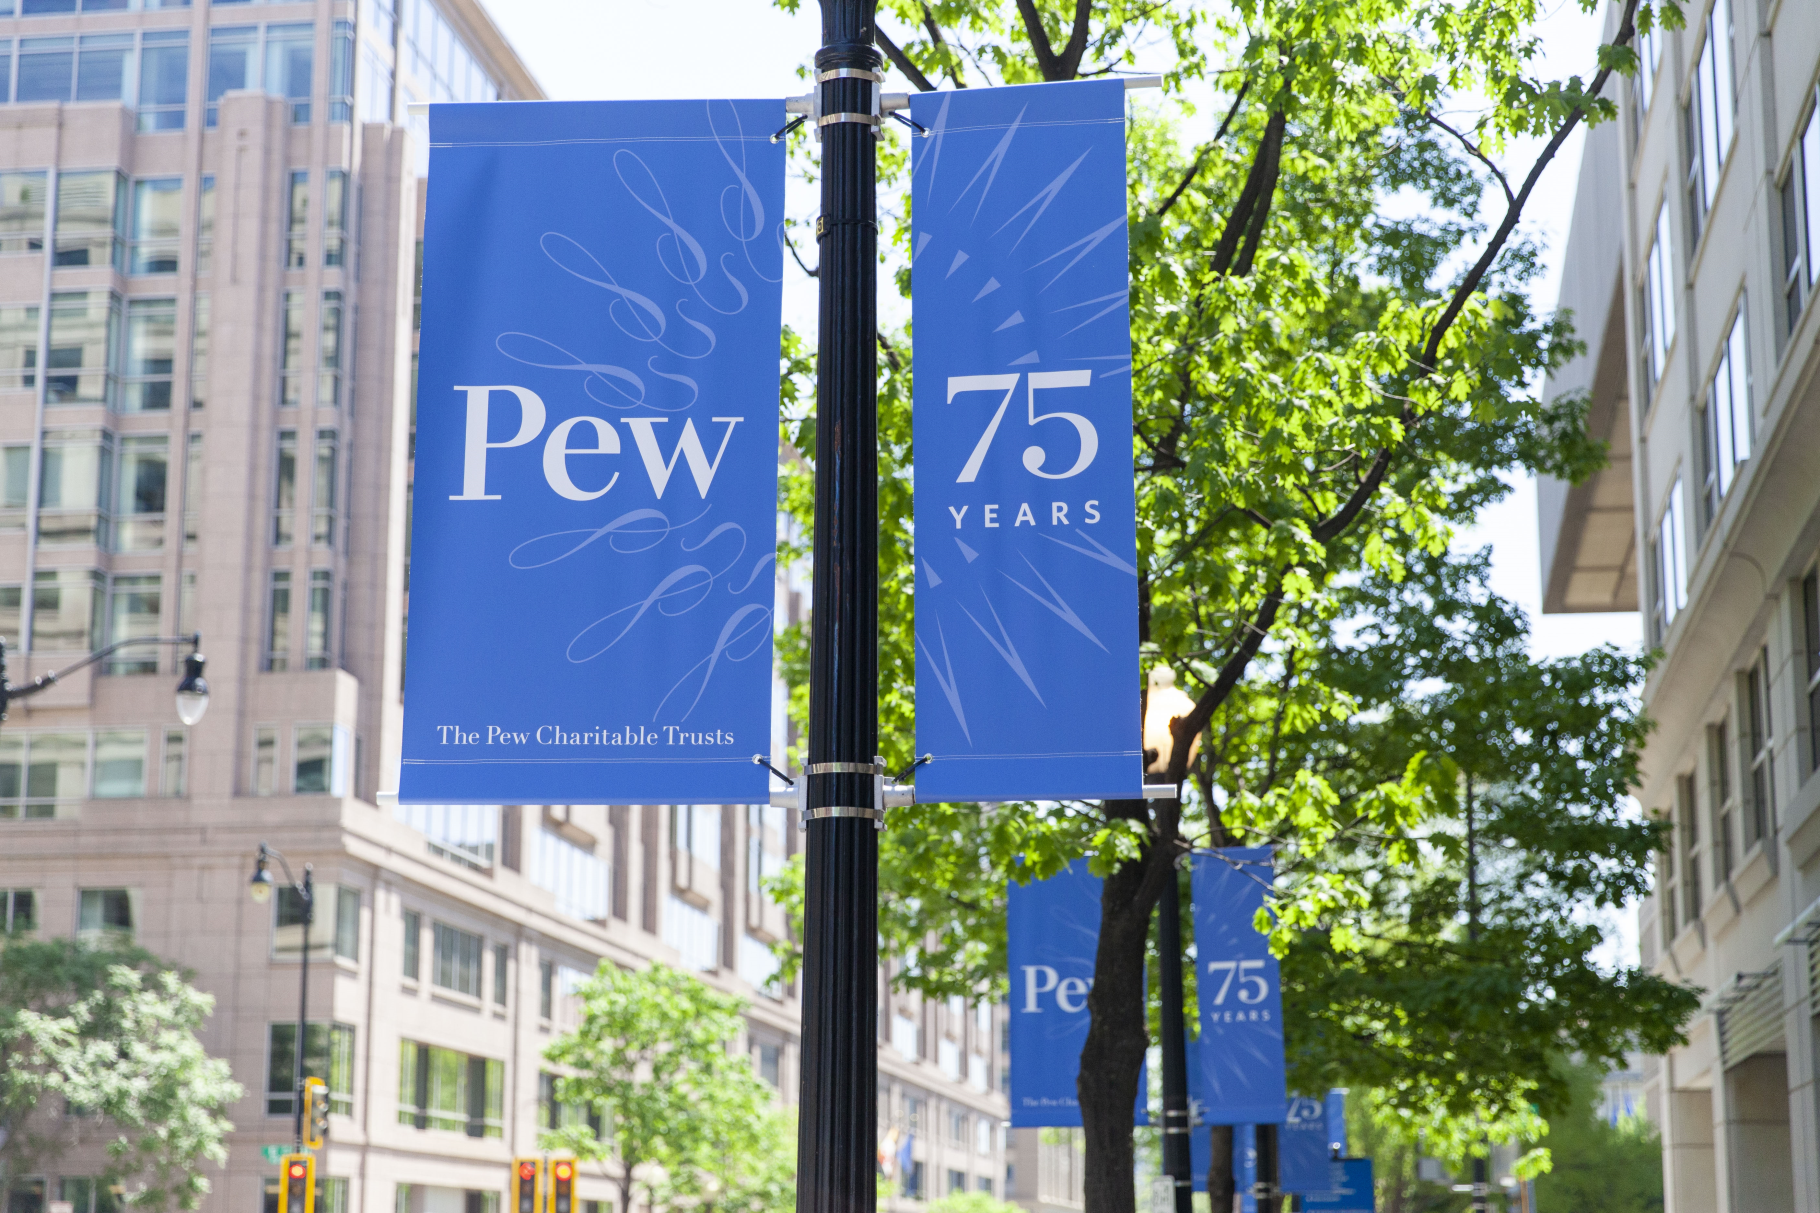 Commemorative Pew 75th Anniversary banners displayed on 9th street in Washington, DC. 